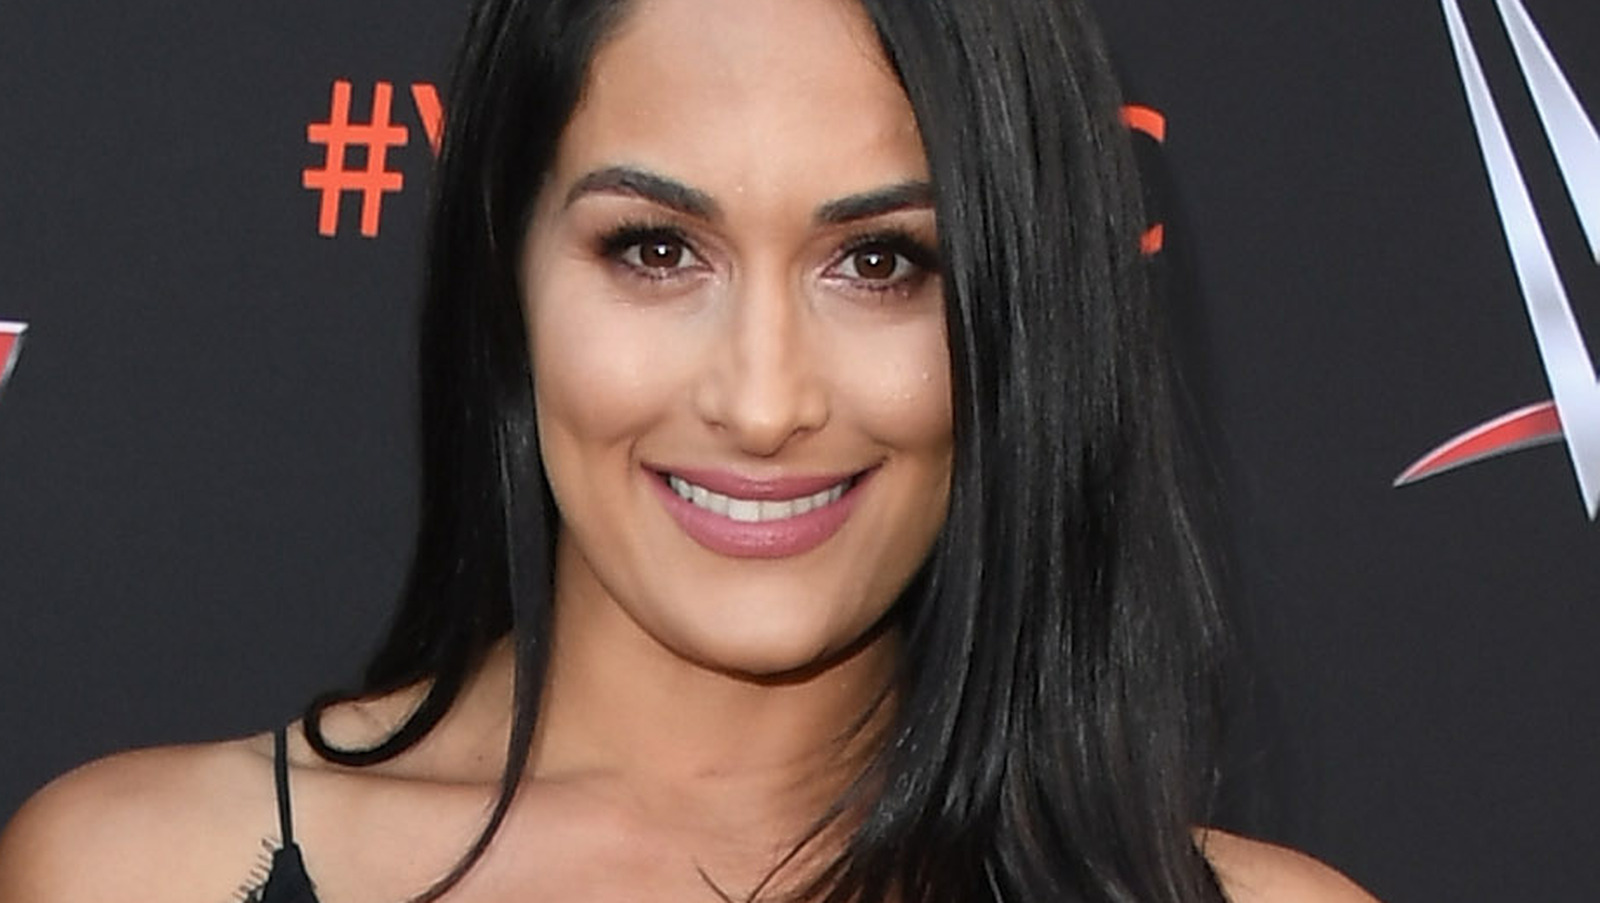 Nikki Bella Joins The Cast Of “Dancing with the Stars” (Photos) - PWMania -  Wrestling News